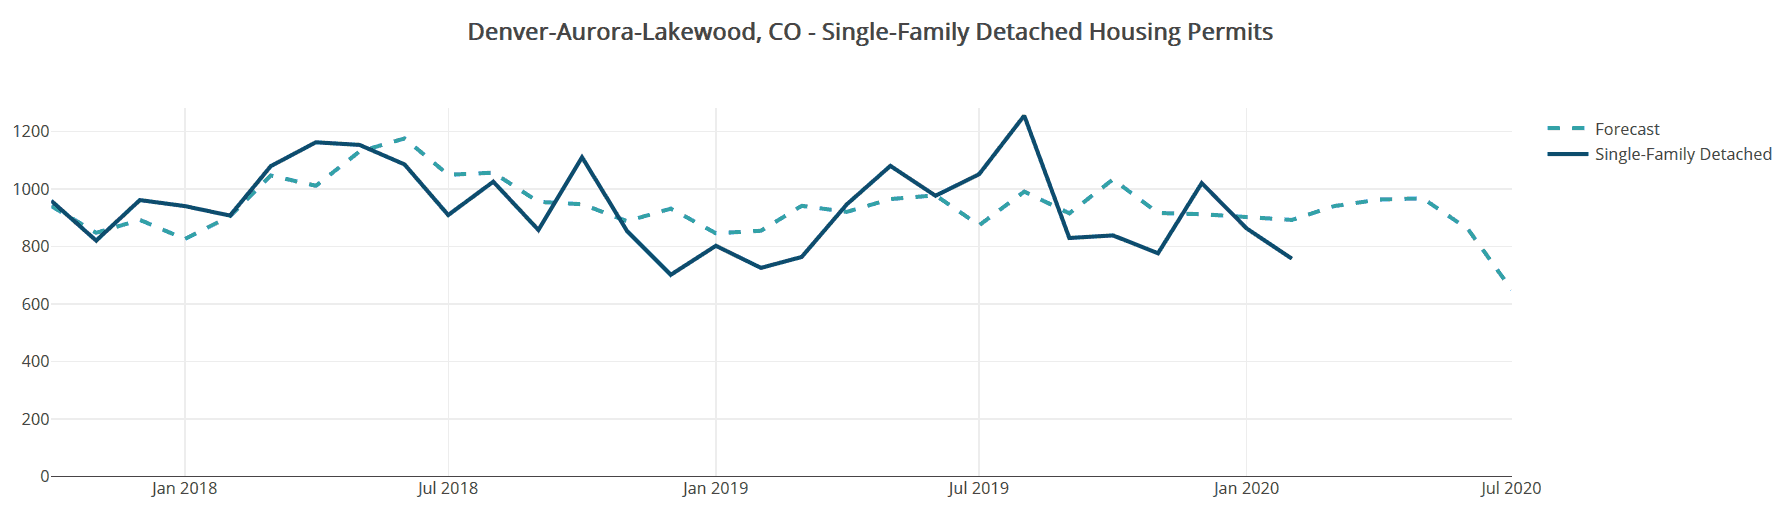 Moderate case: Colorado's COVID-19 housing market - meaningful rise in unemployment with related hits to market confidence and a drop in lending activity